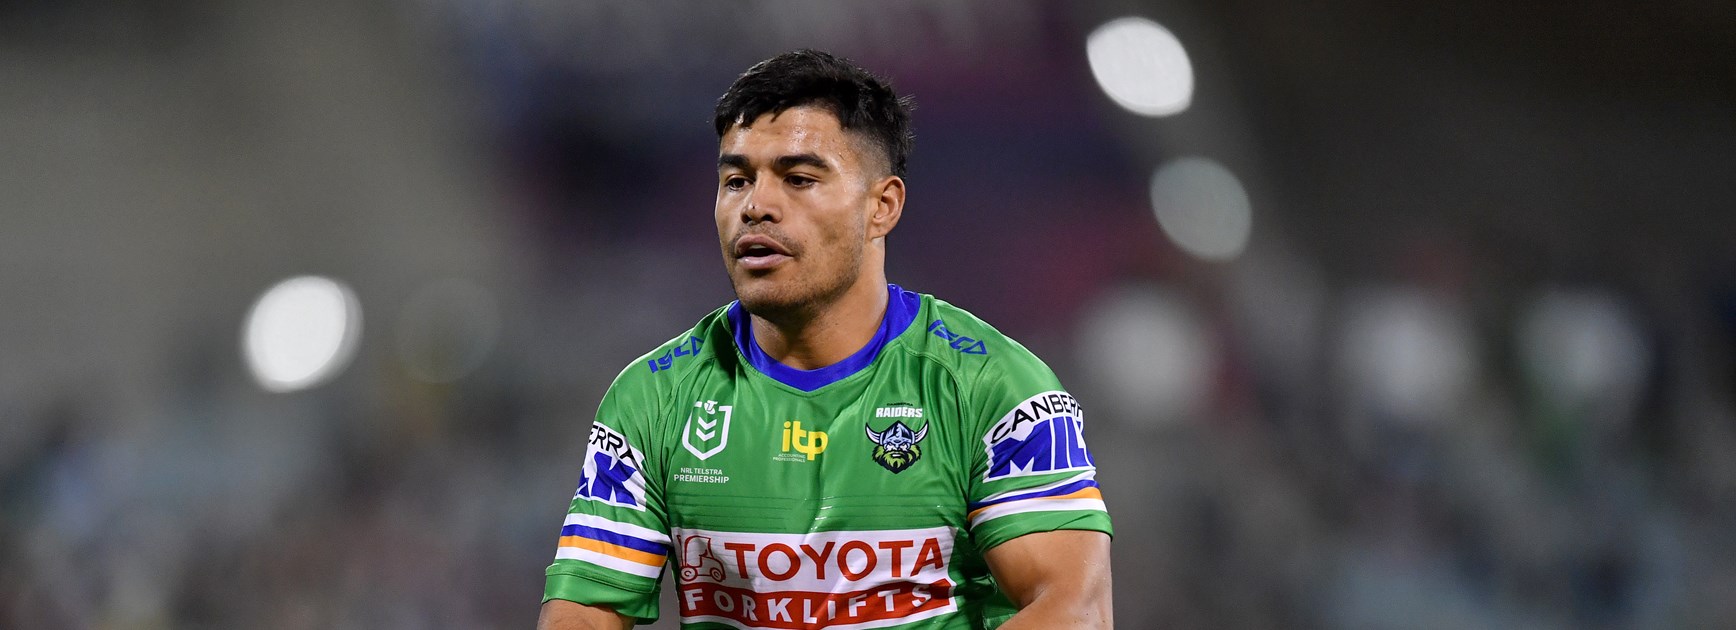 NRL Match Preview: Raiders v Panthers